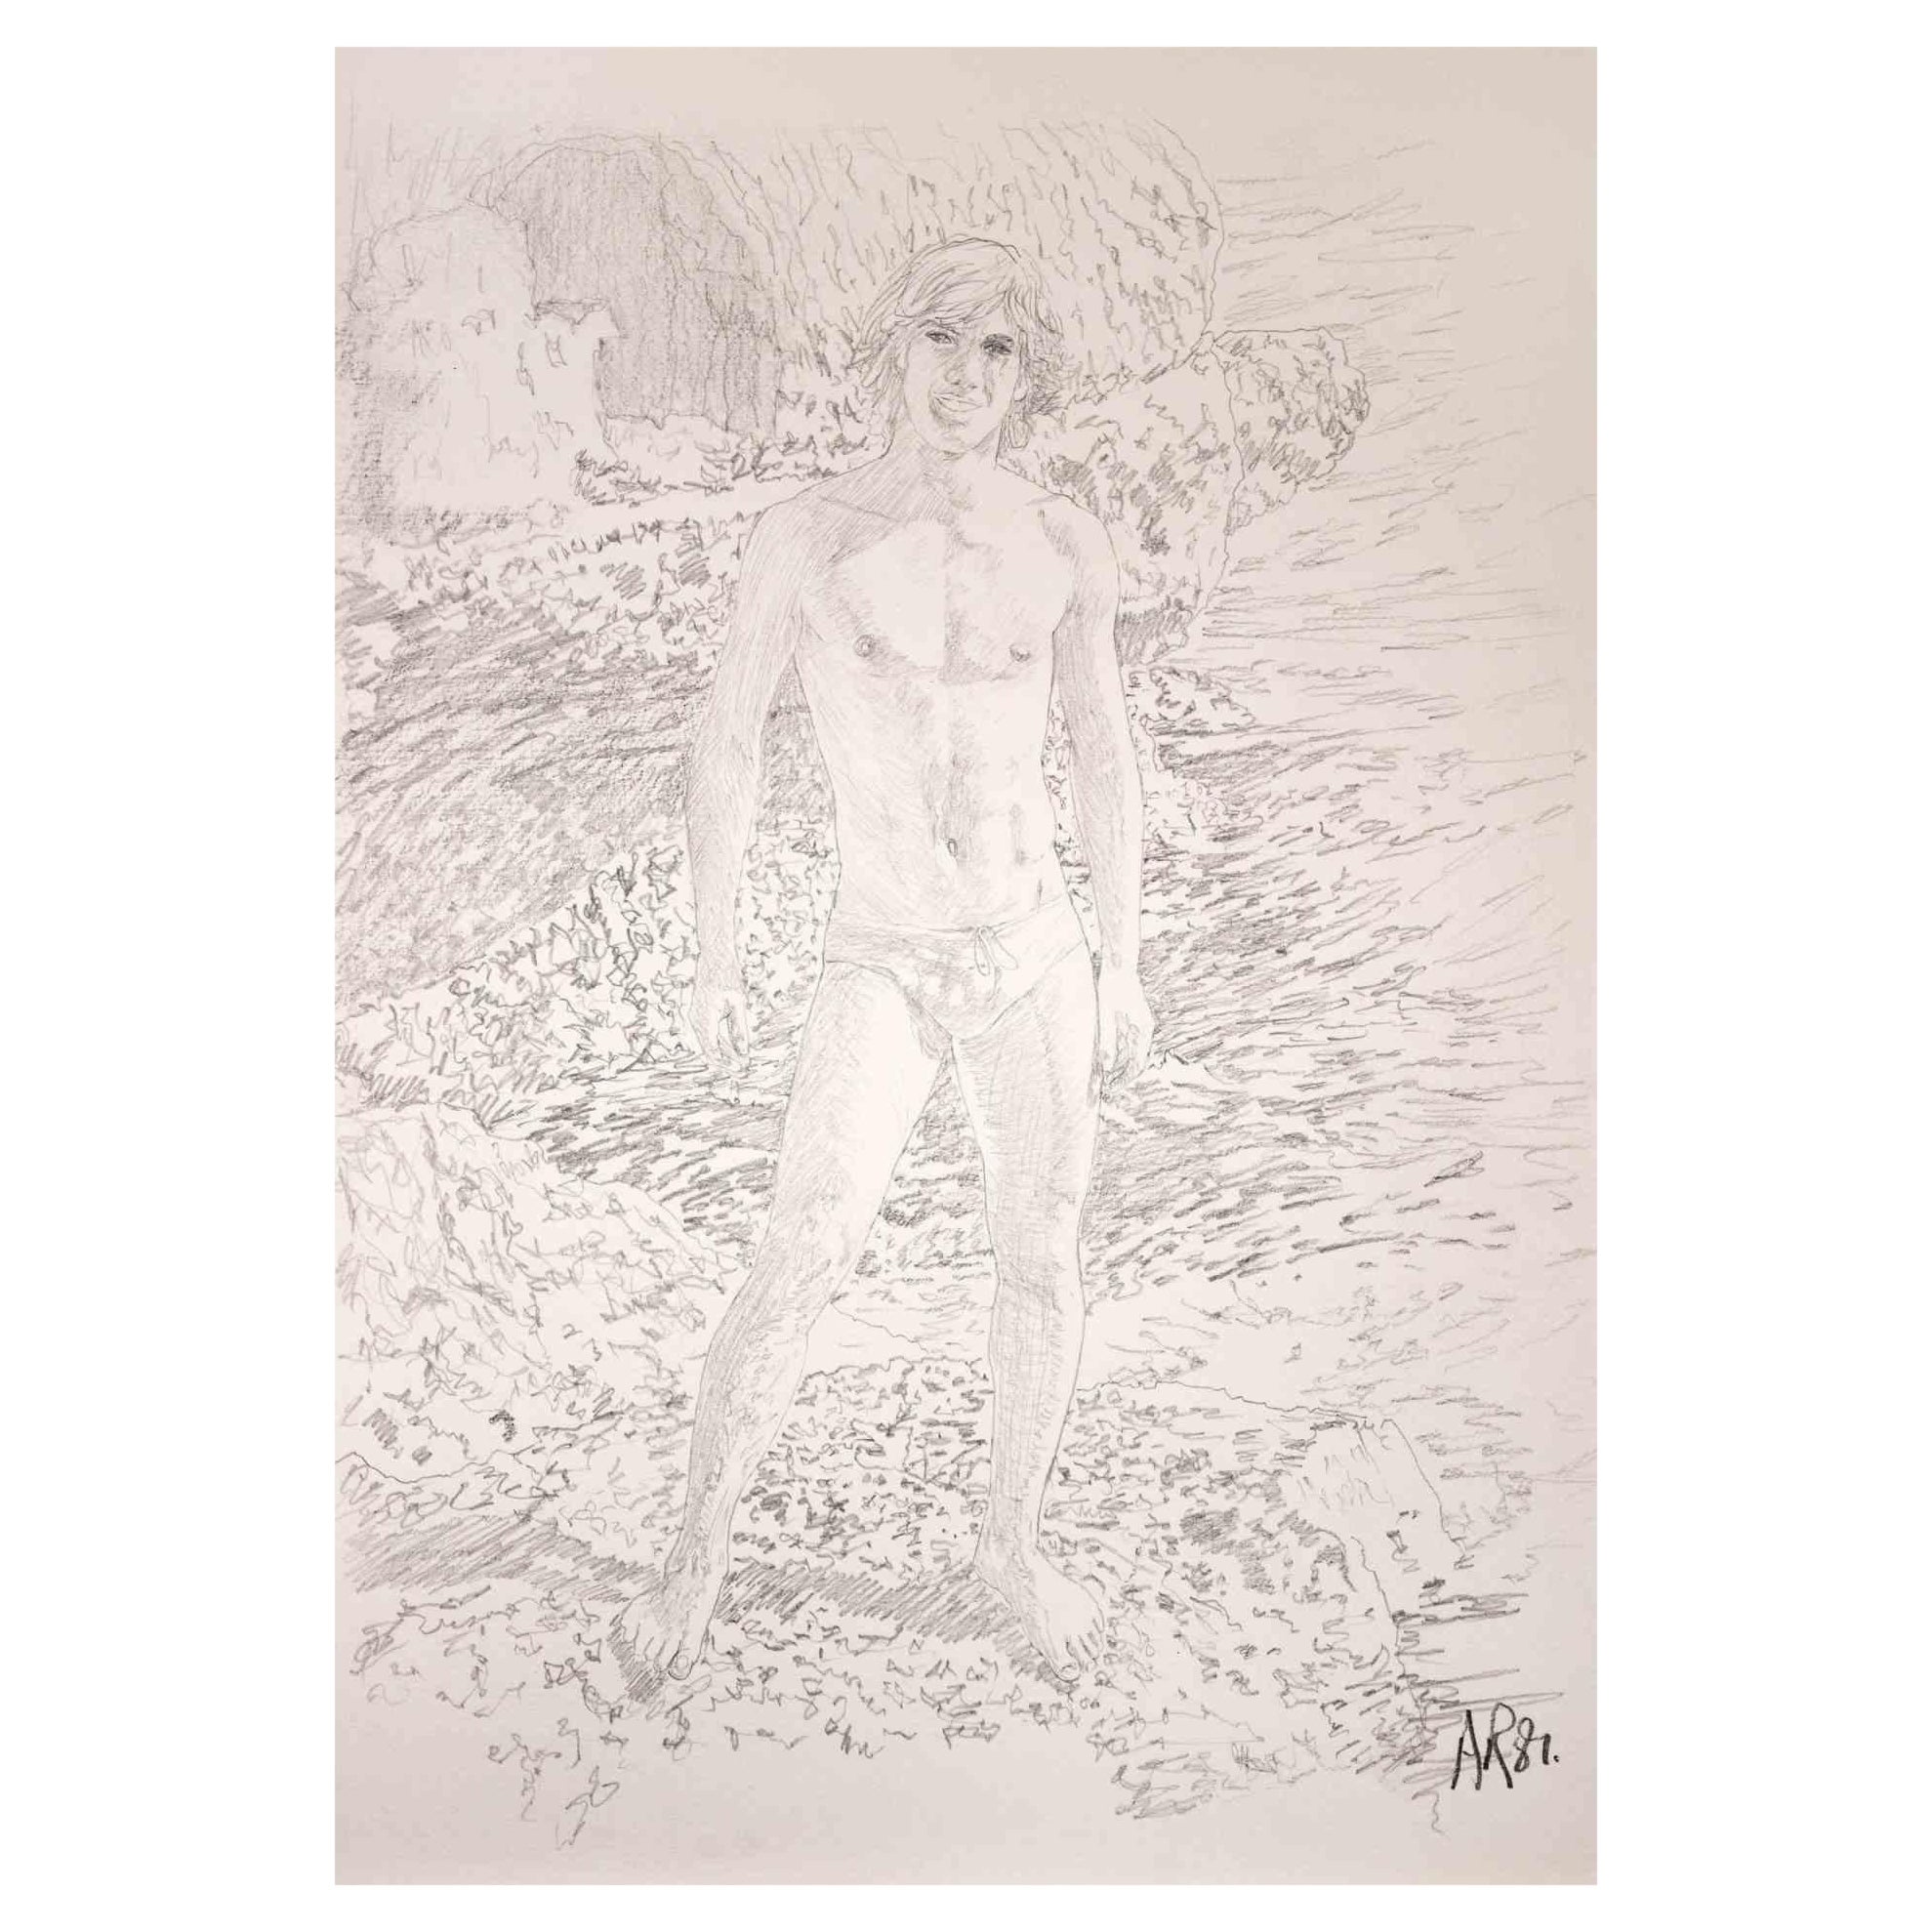 Boy on a cliff  is an original drawing on pencil realized by Anthony Roaland in 1981. Hand-signed and dated by the artist on the lower right margin. 

In the foreground the figure is depicted with a delicate style. In the back the rocky